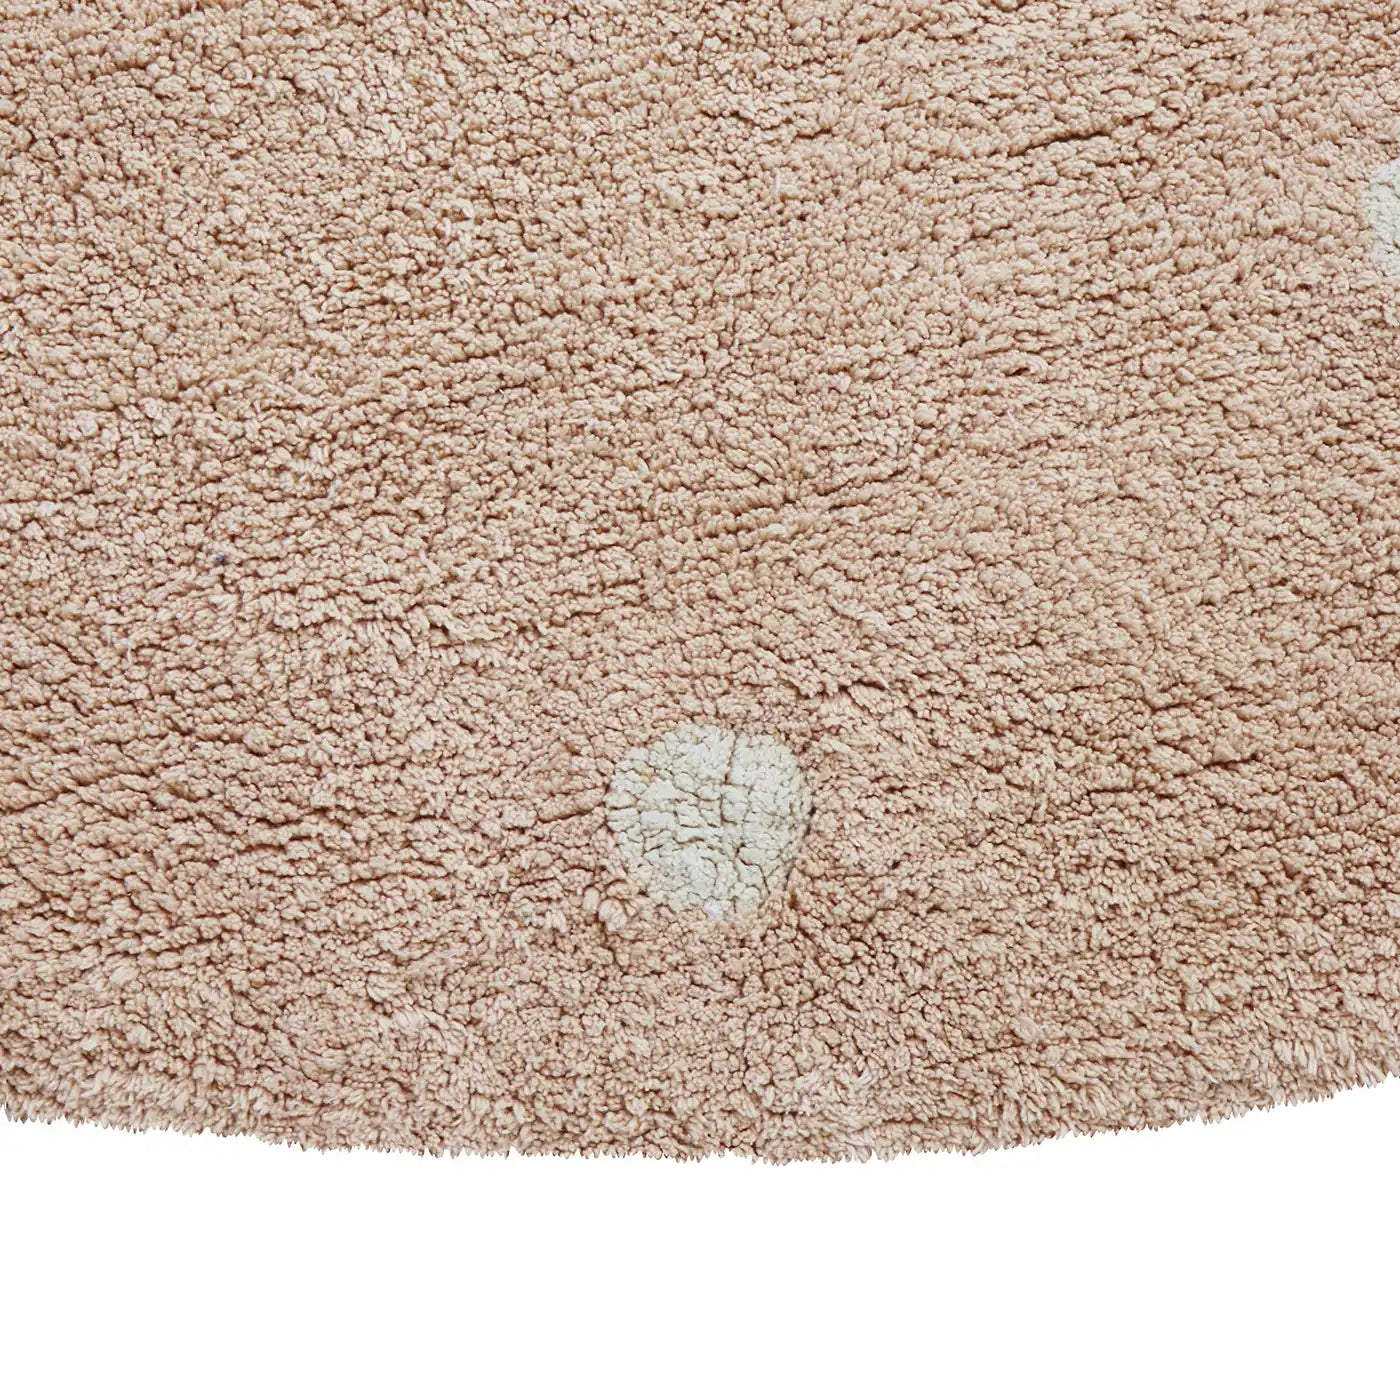 Lorena Canals Round Dot Washable Rug - Rose (Mushroom hunters / Forest finds Collection)